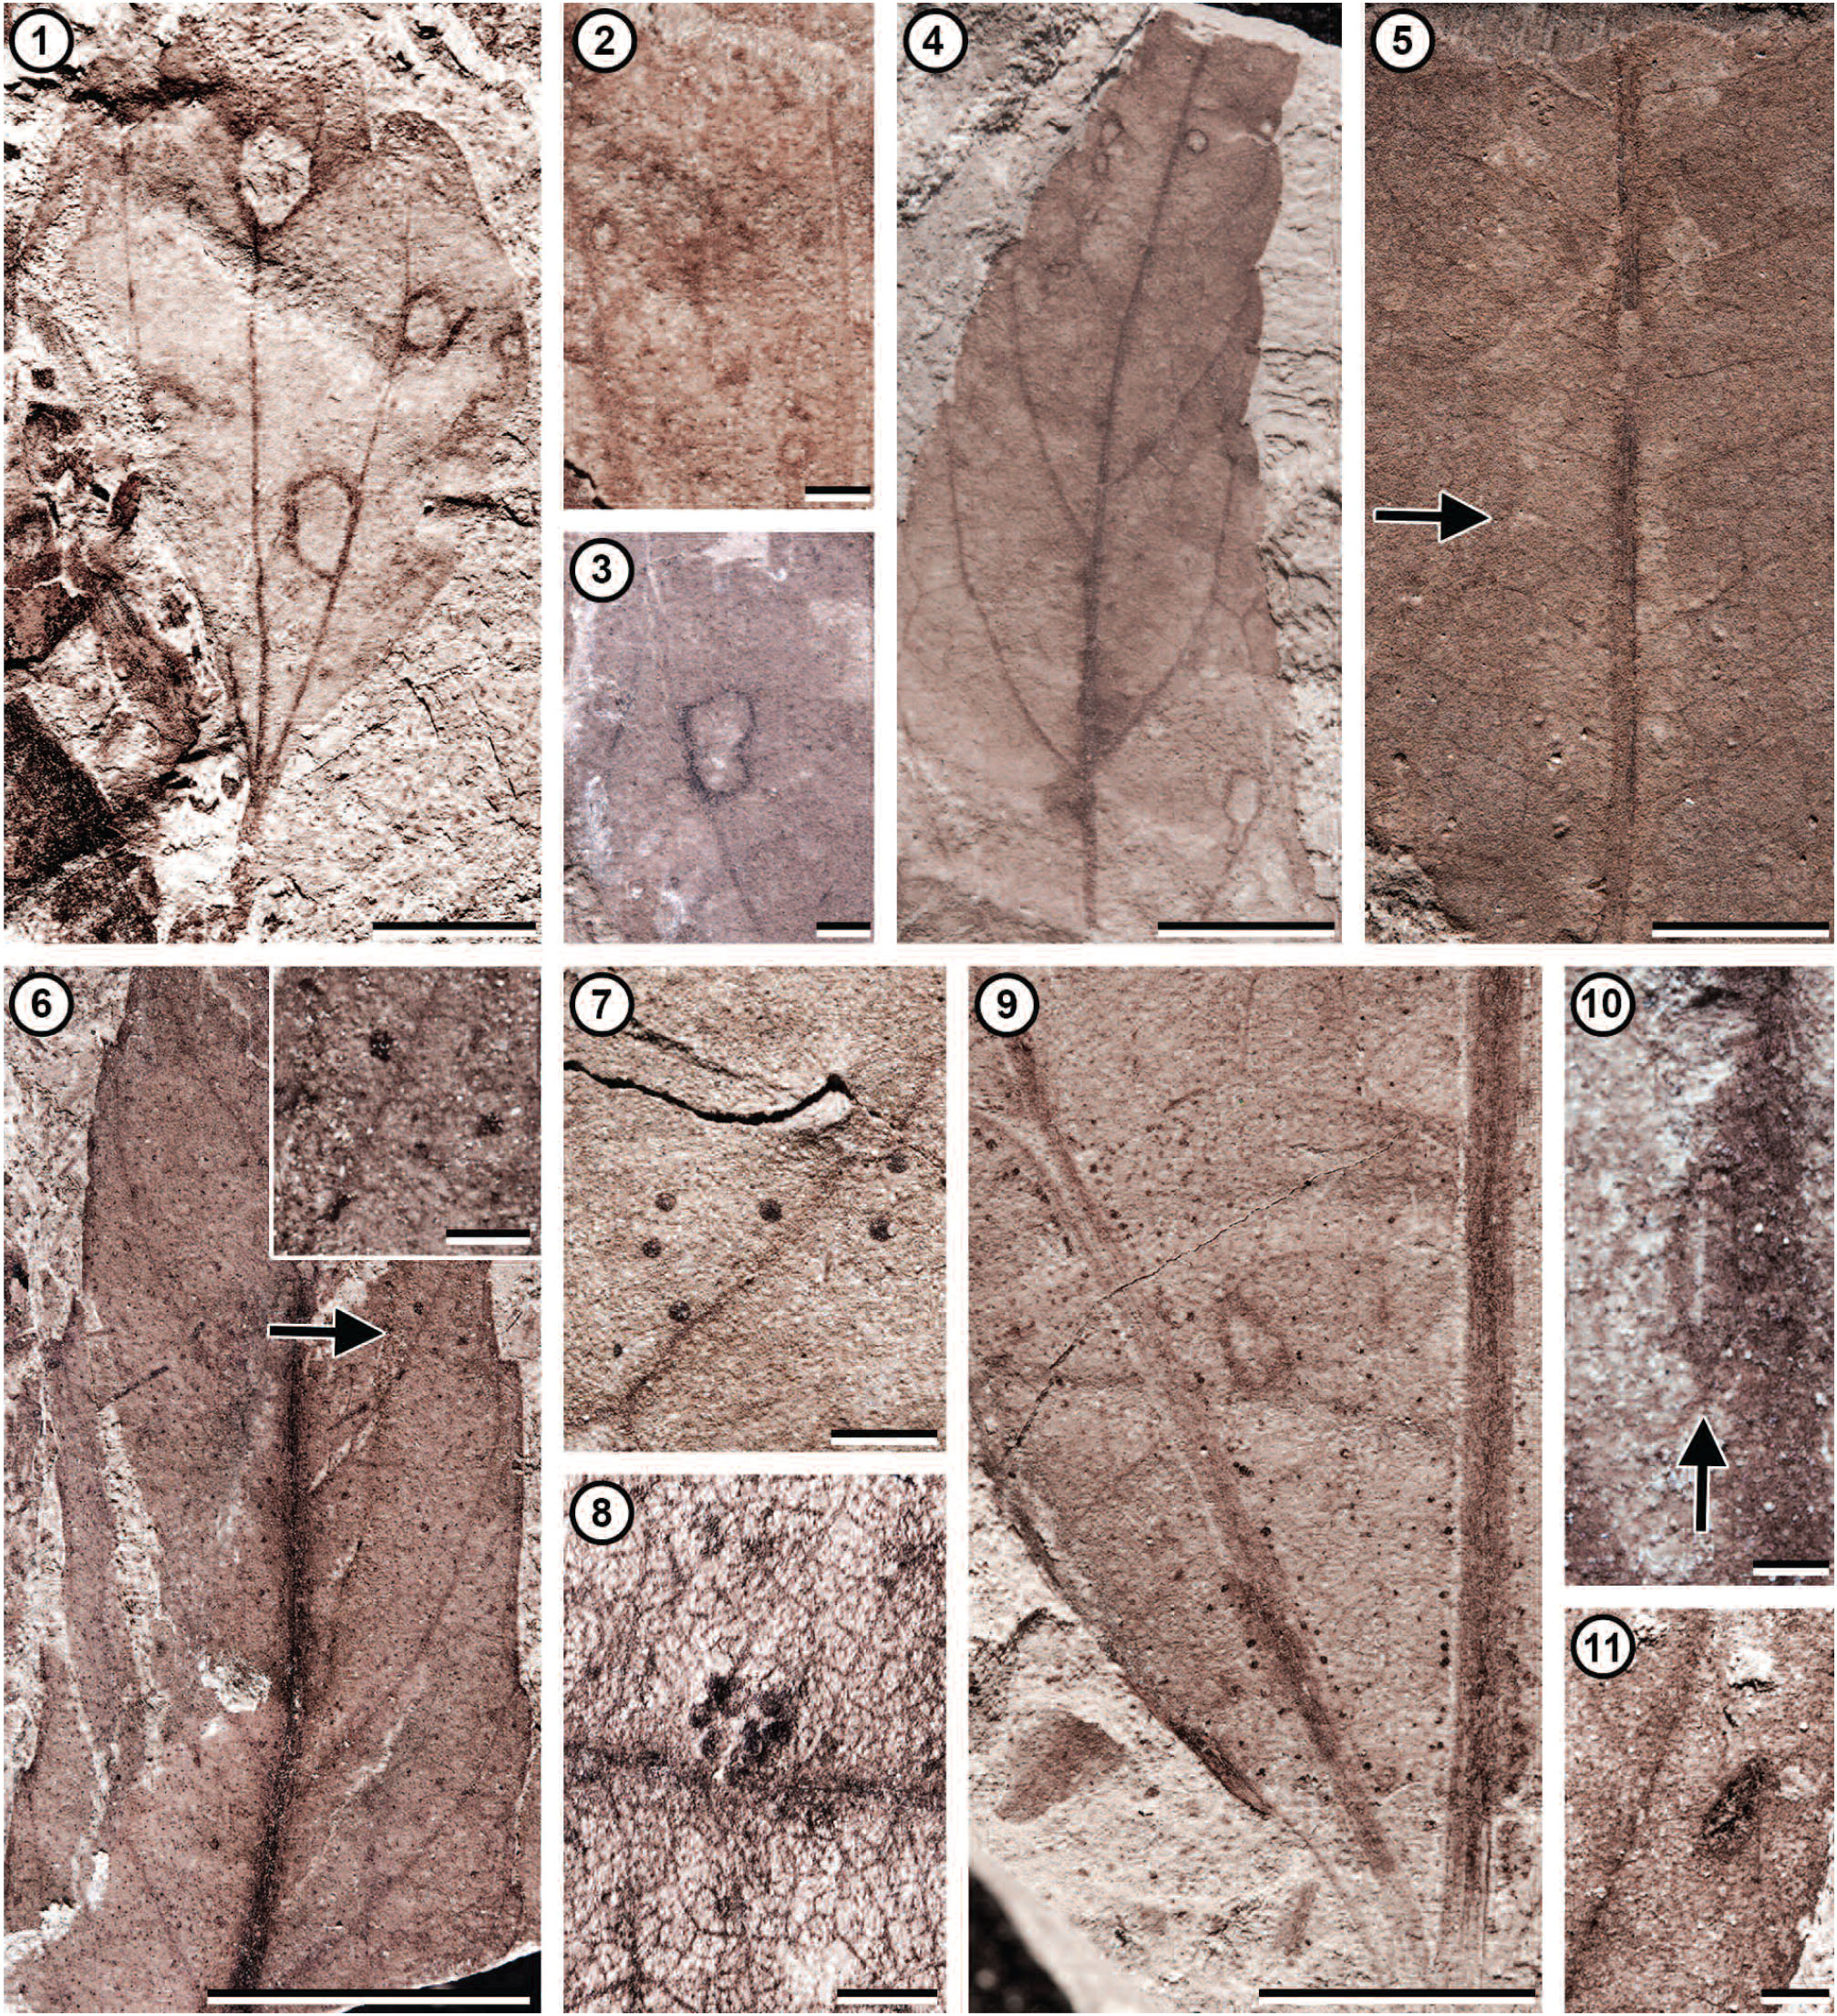 Diverse Plant Insect Associations From The Latest Cretaceous And